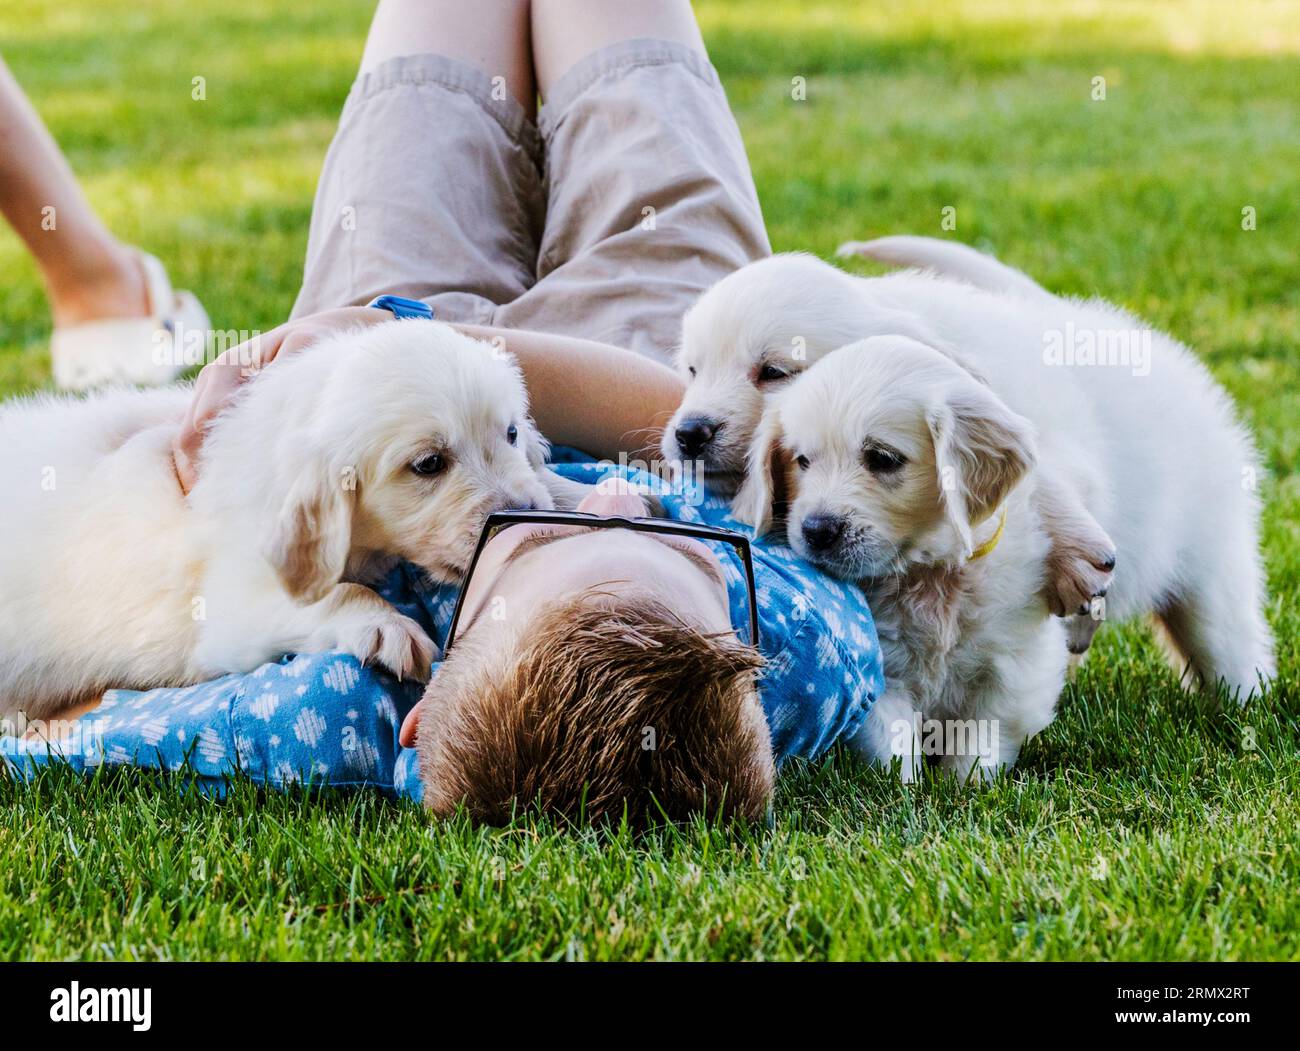 Young boy playing outside on lawn with Platinum, or Cream colored Golden Retriever puppies Stock Photo